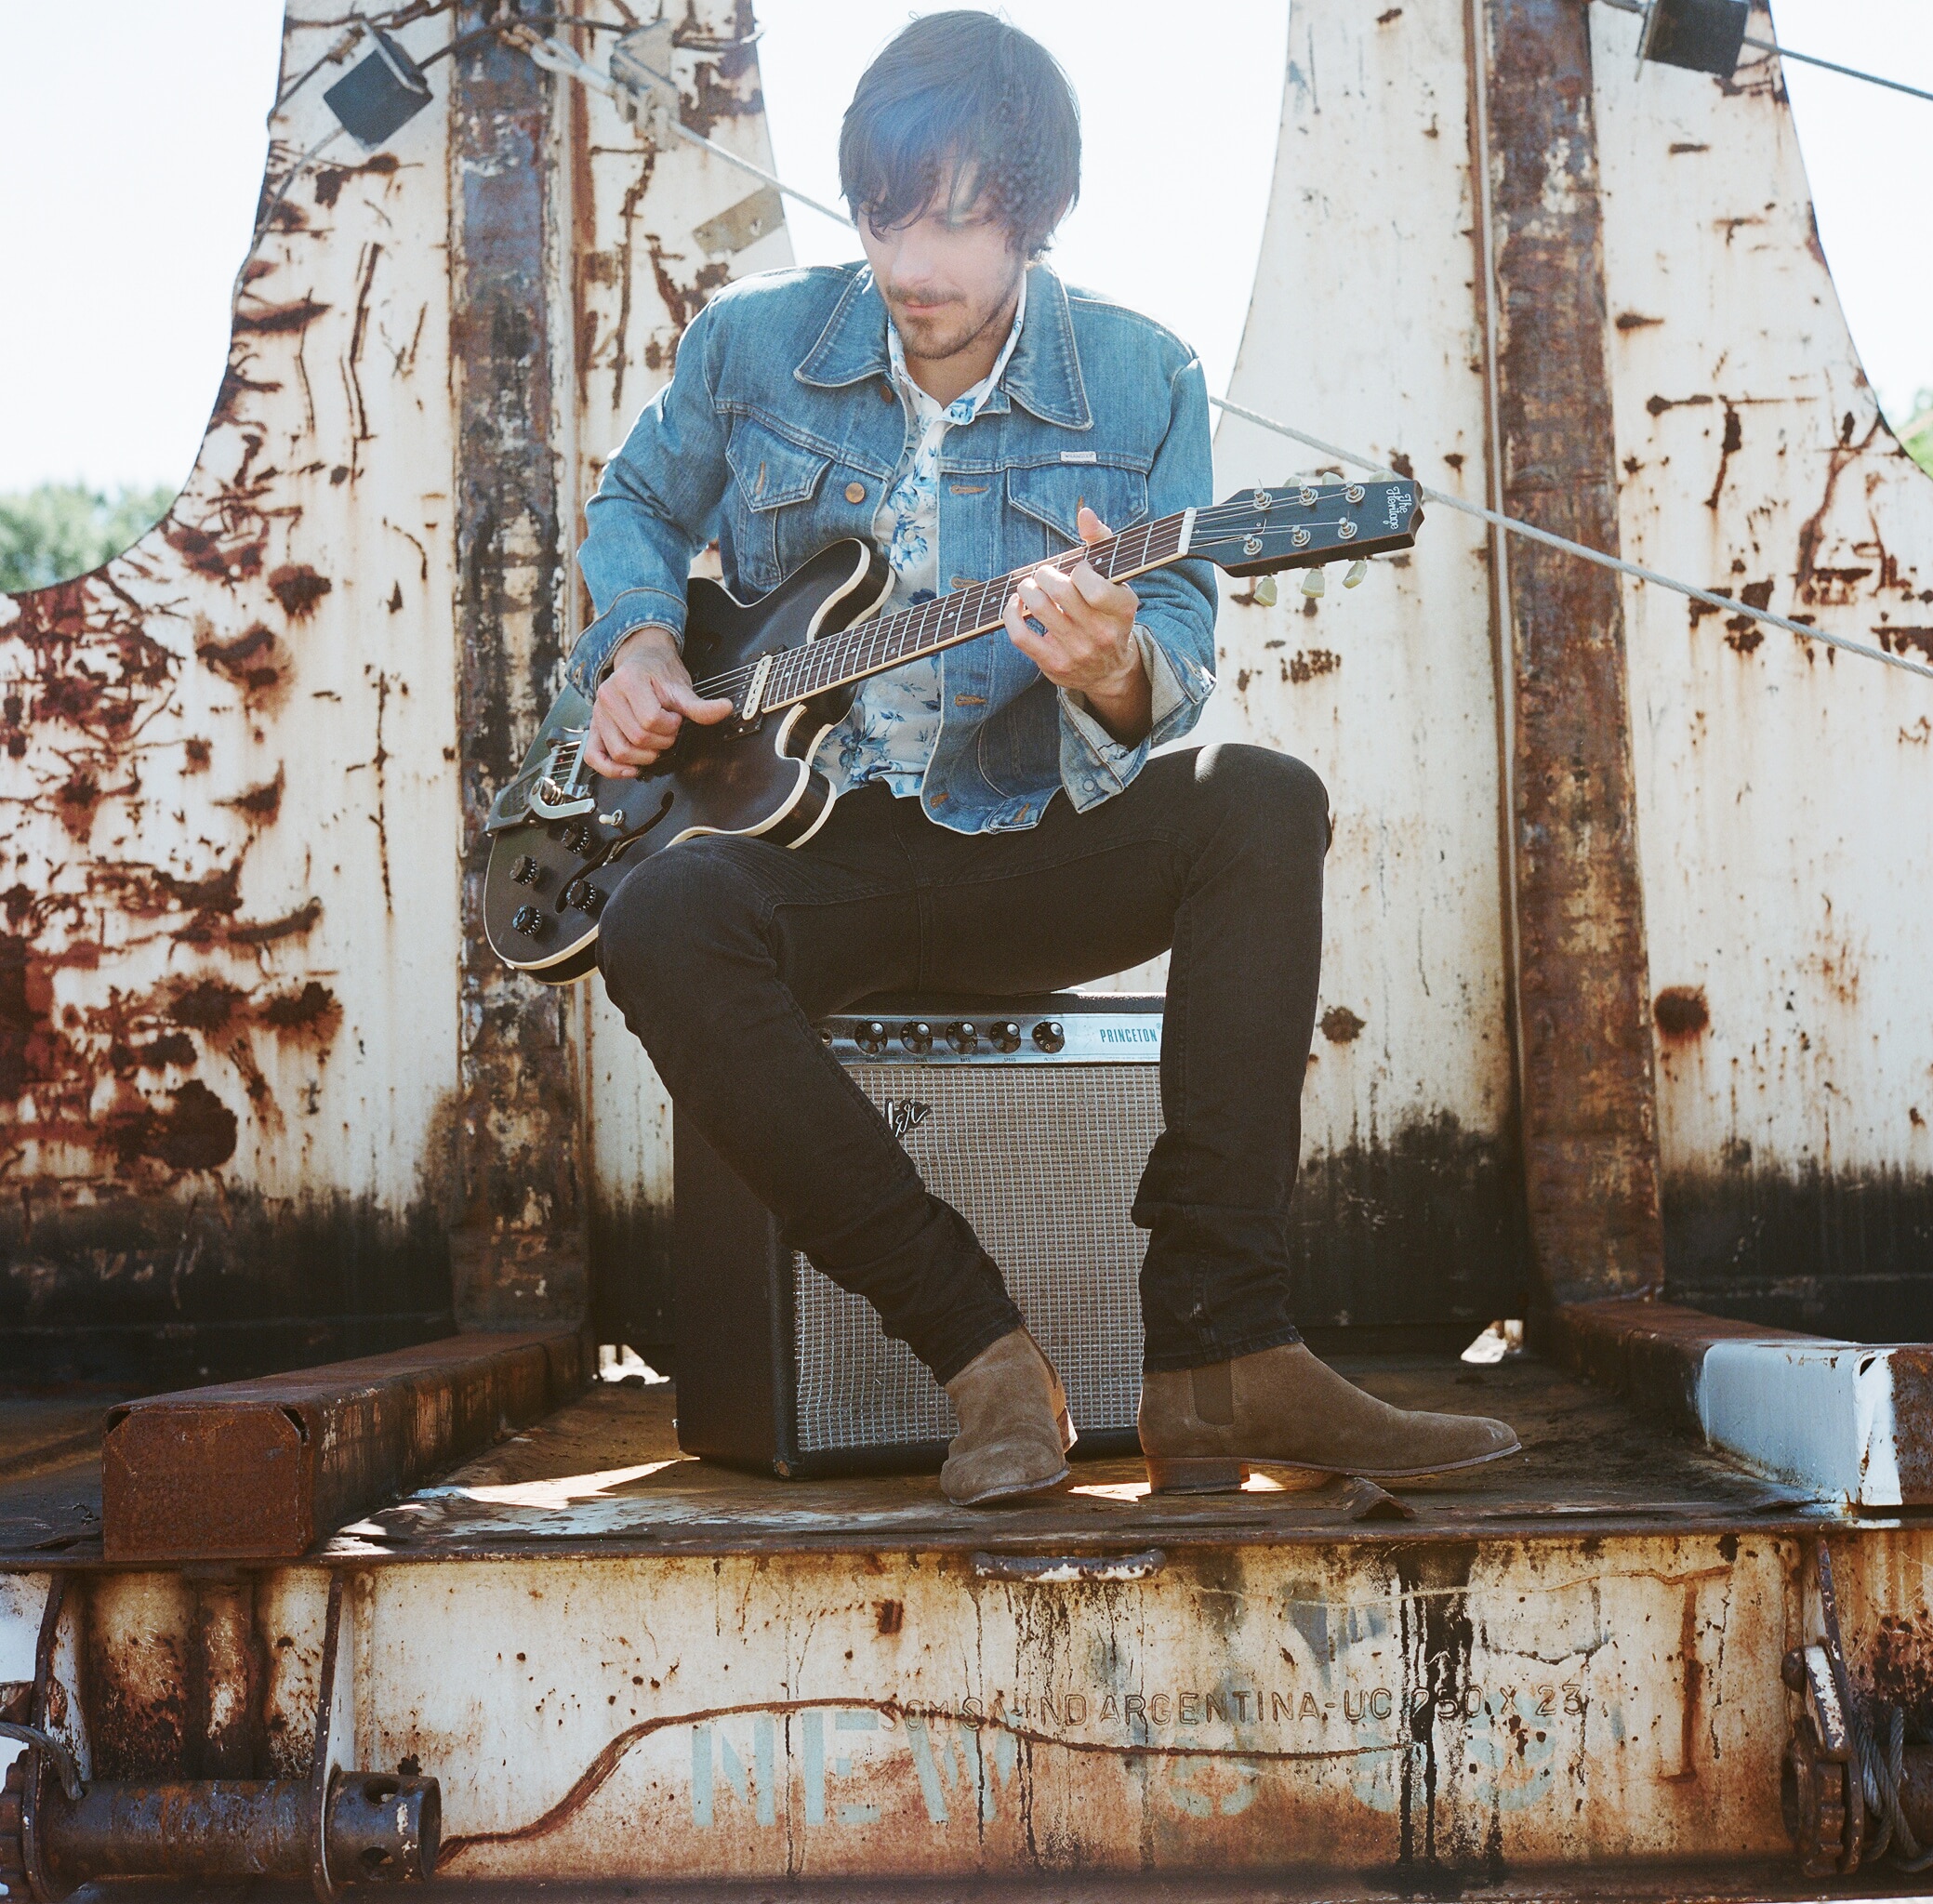 Announcing the American Songwriter Lyric Contest “Dream Co-Write” for 2018, Charlie Worsham